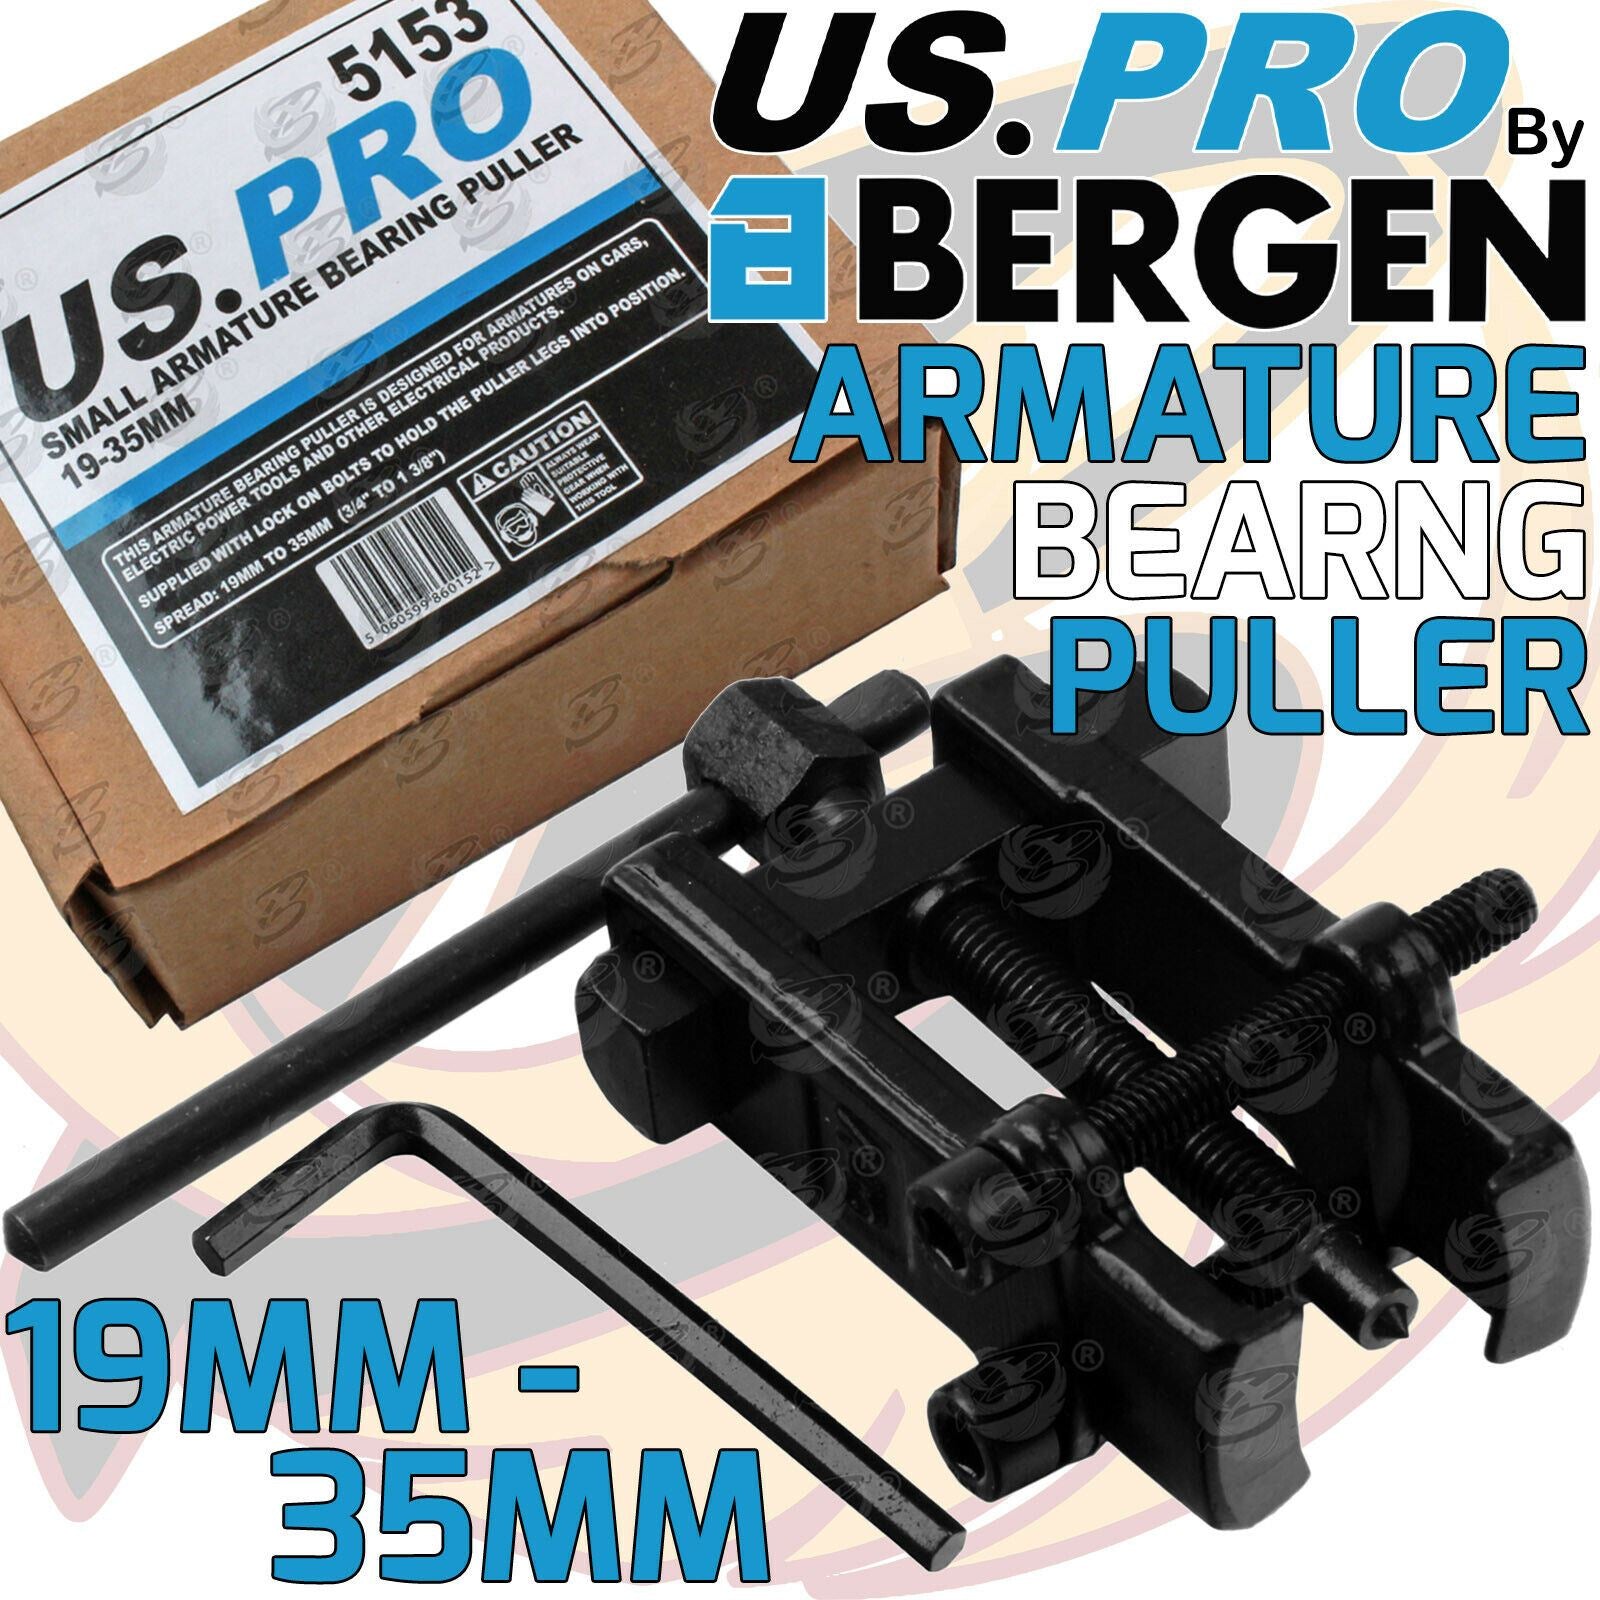 US PRO ARMATURE BEARING PULLER 19MM - 35MM